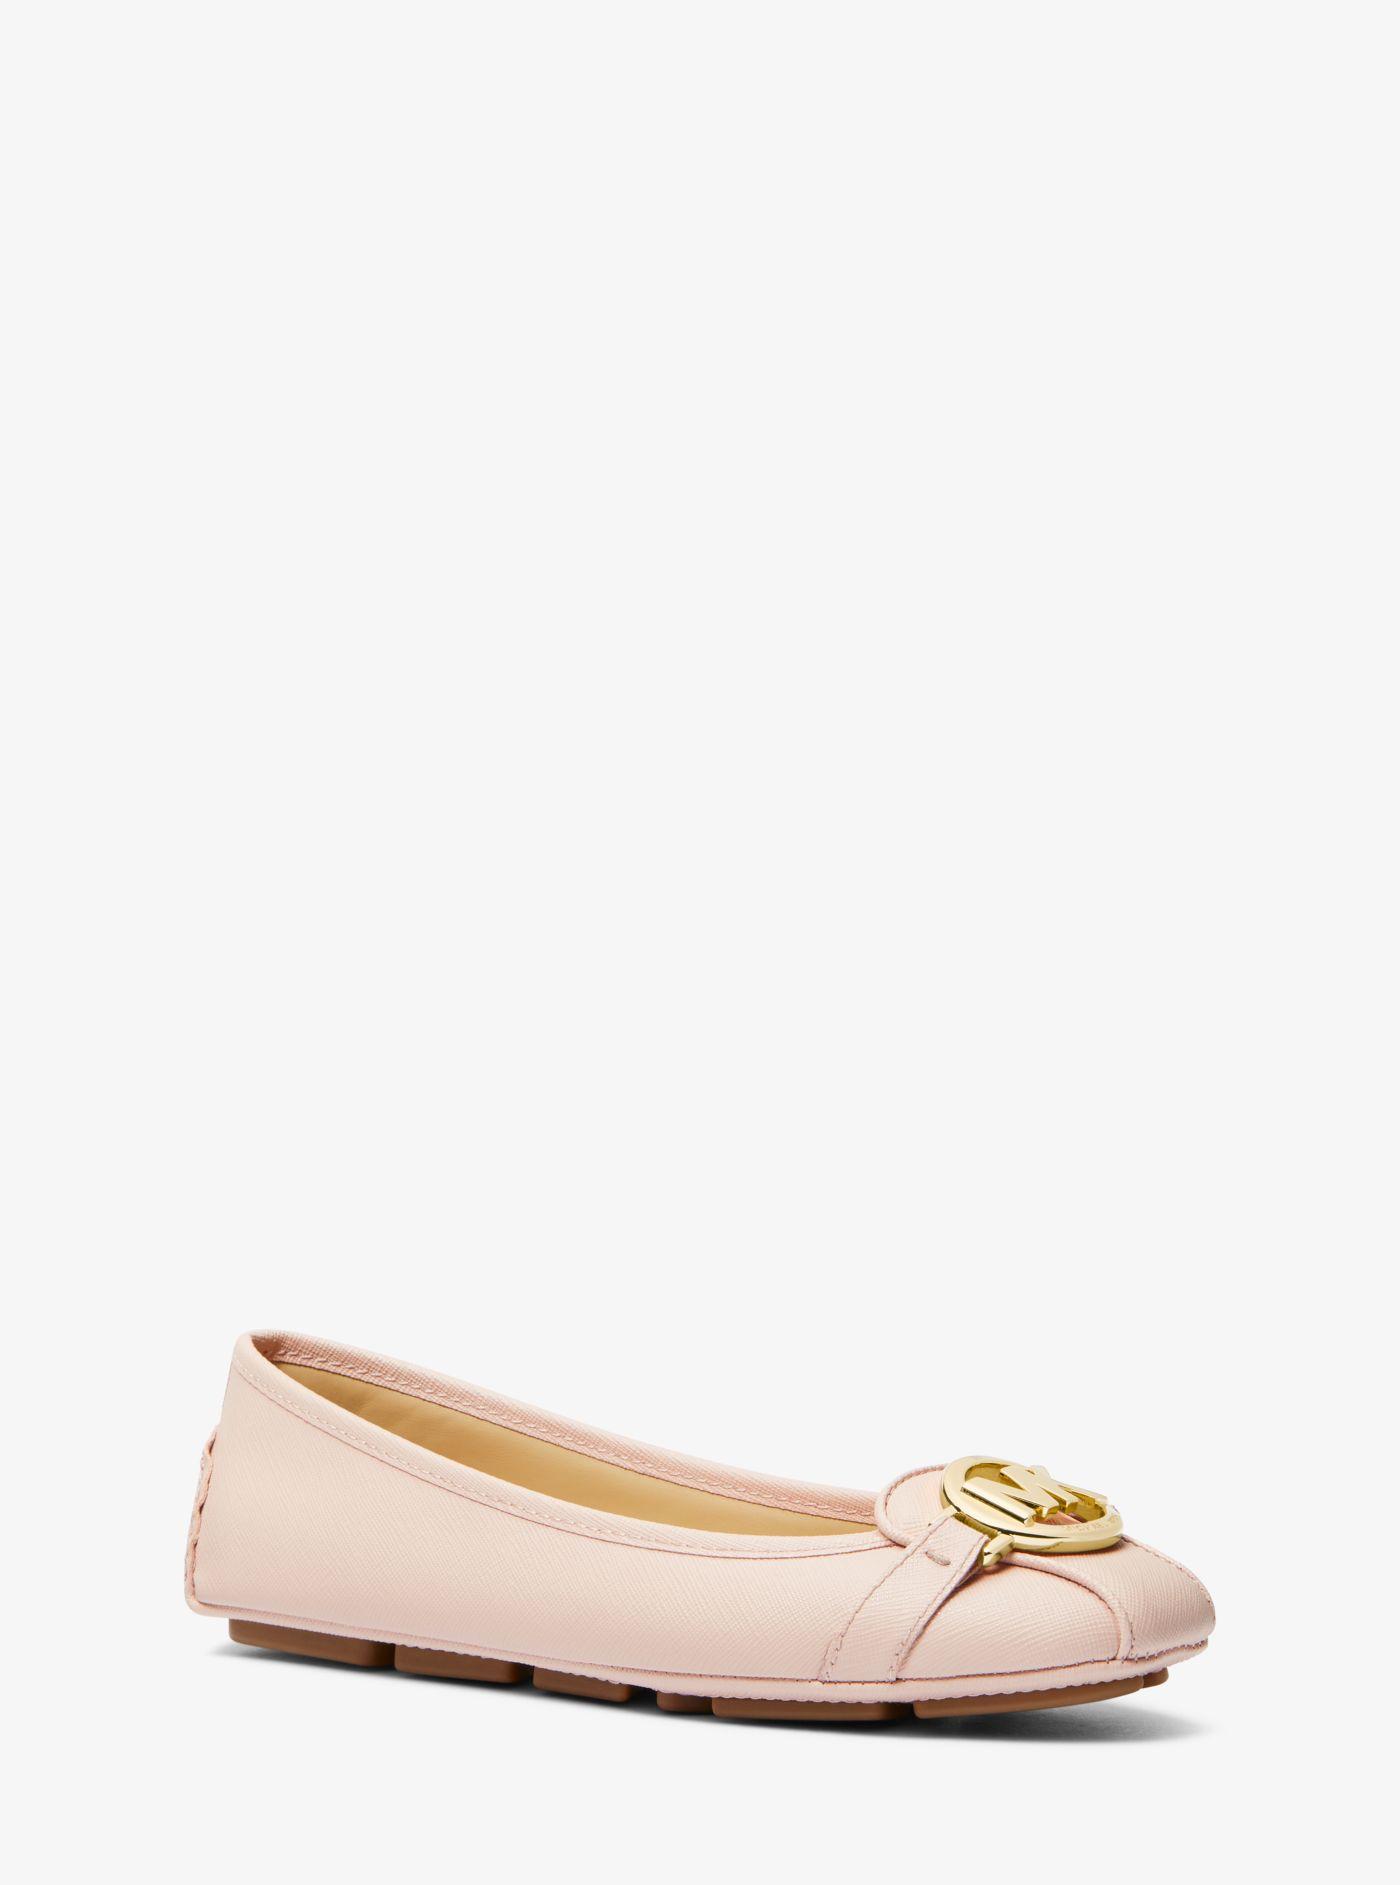 Michael Kors Fulton Faux Saffiano Leather Moccasin in Pink | Lyst